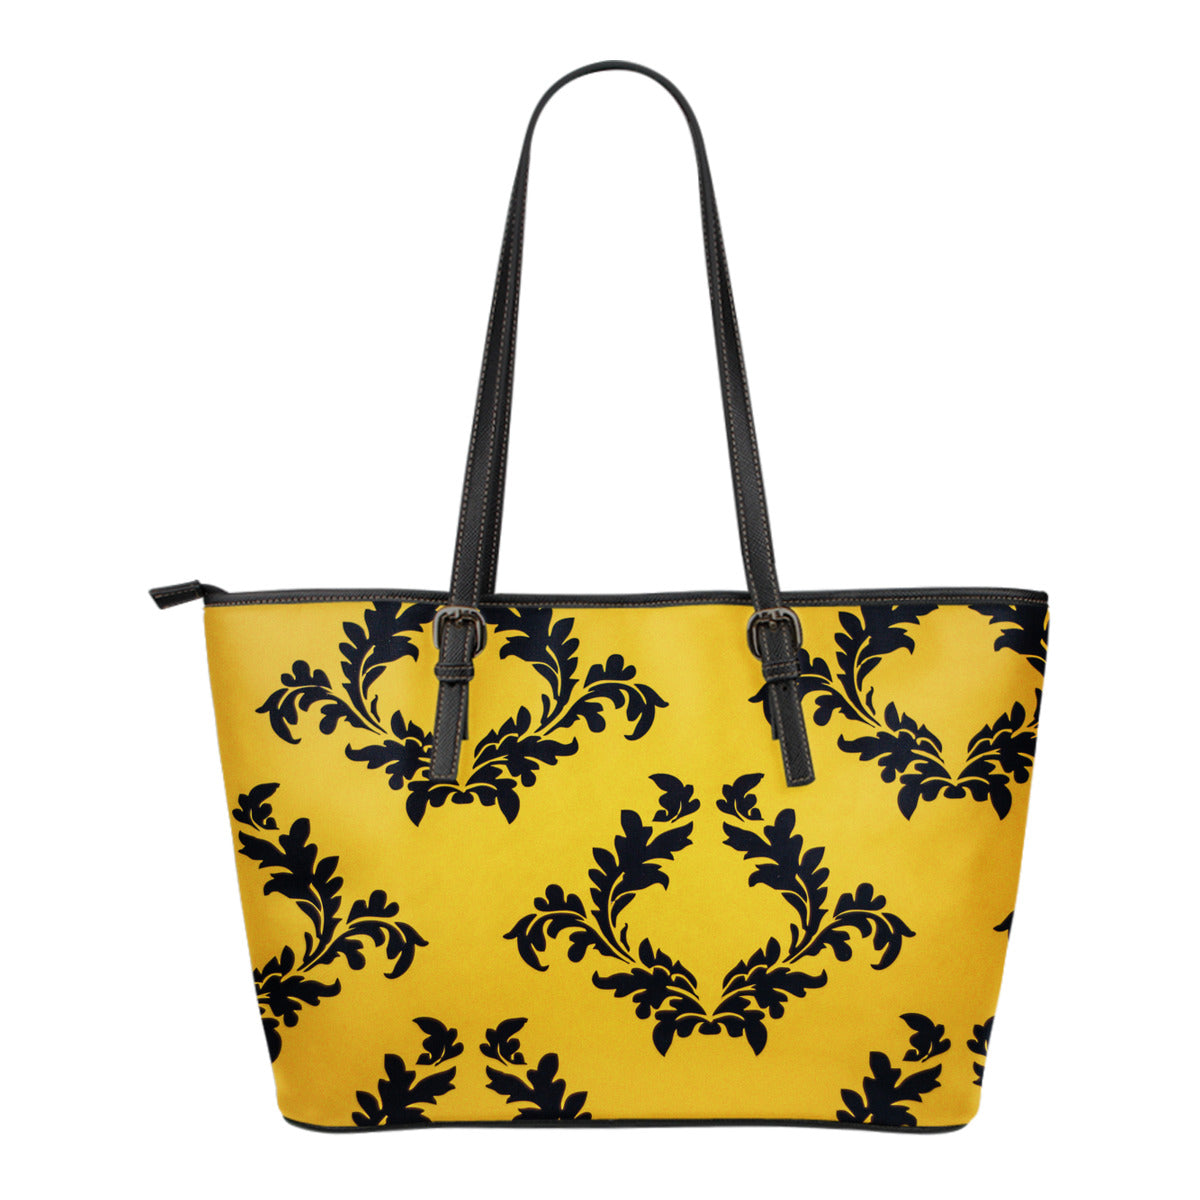 Retro Flower Small Leather Tote Bag